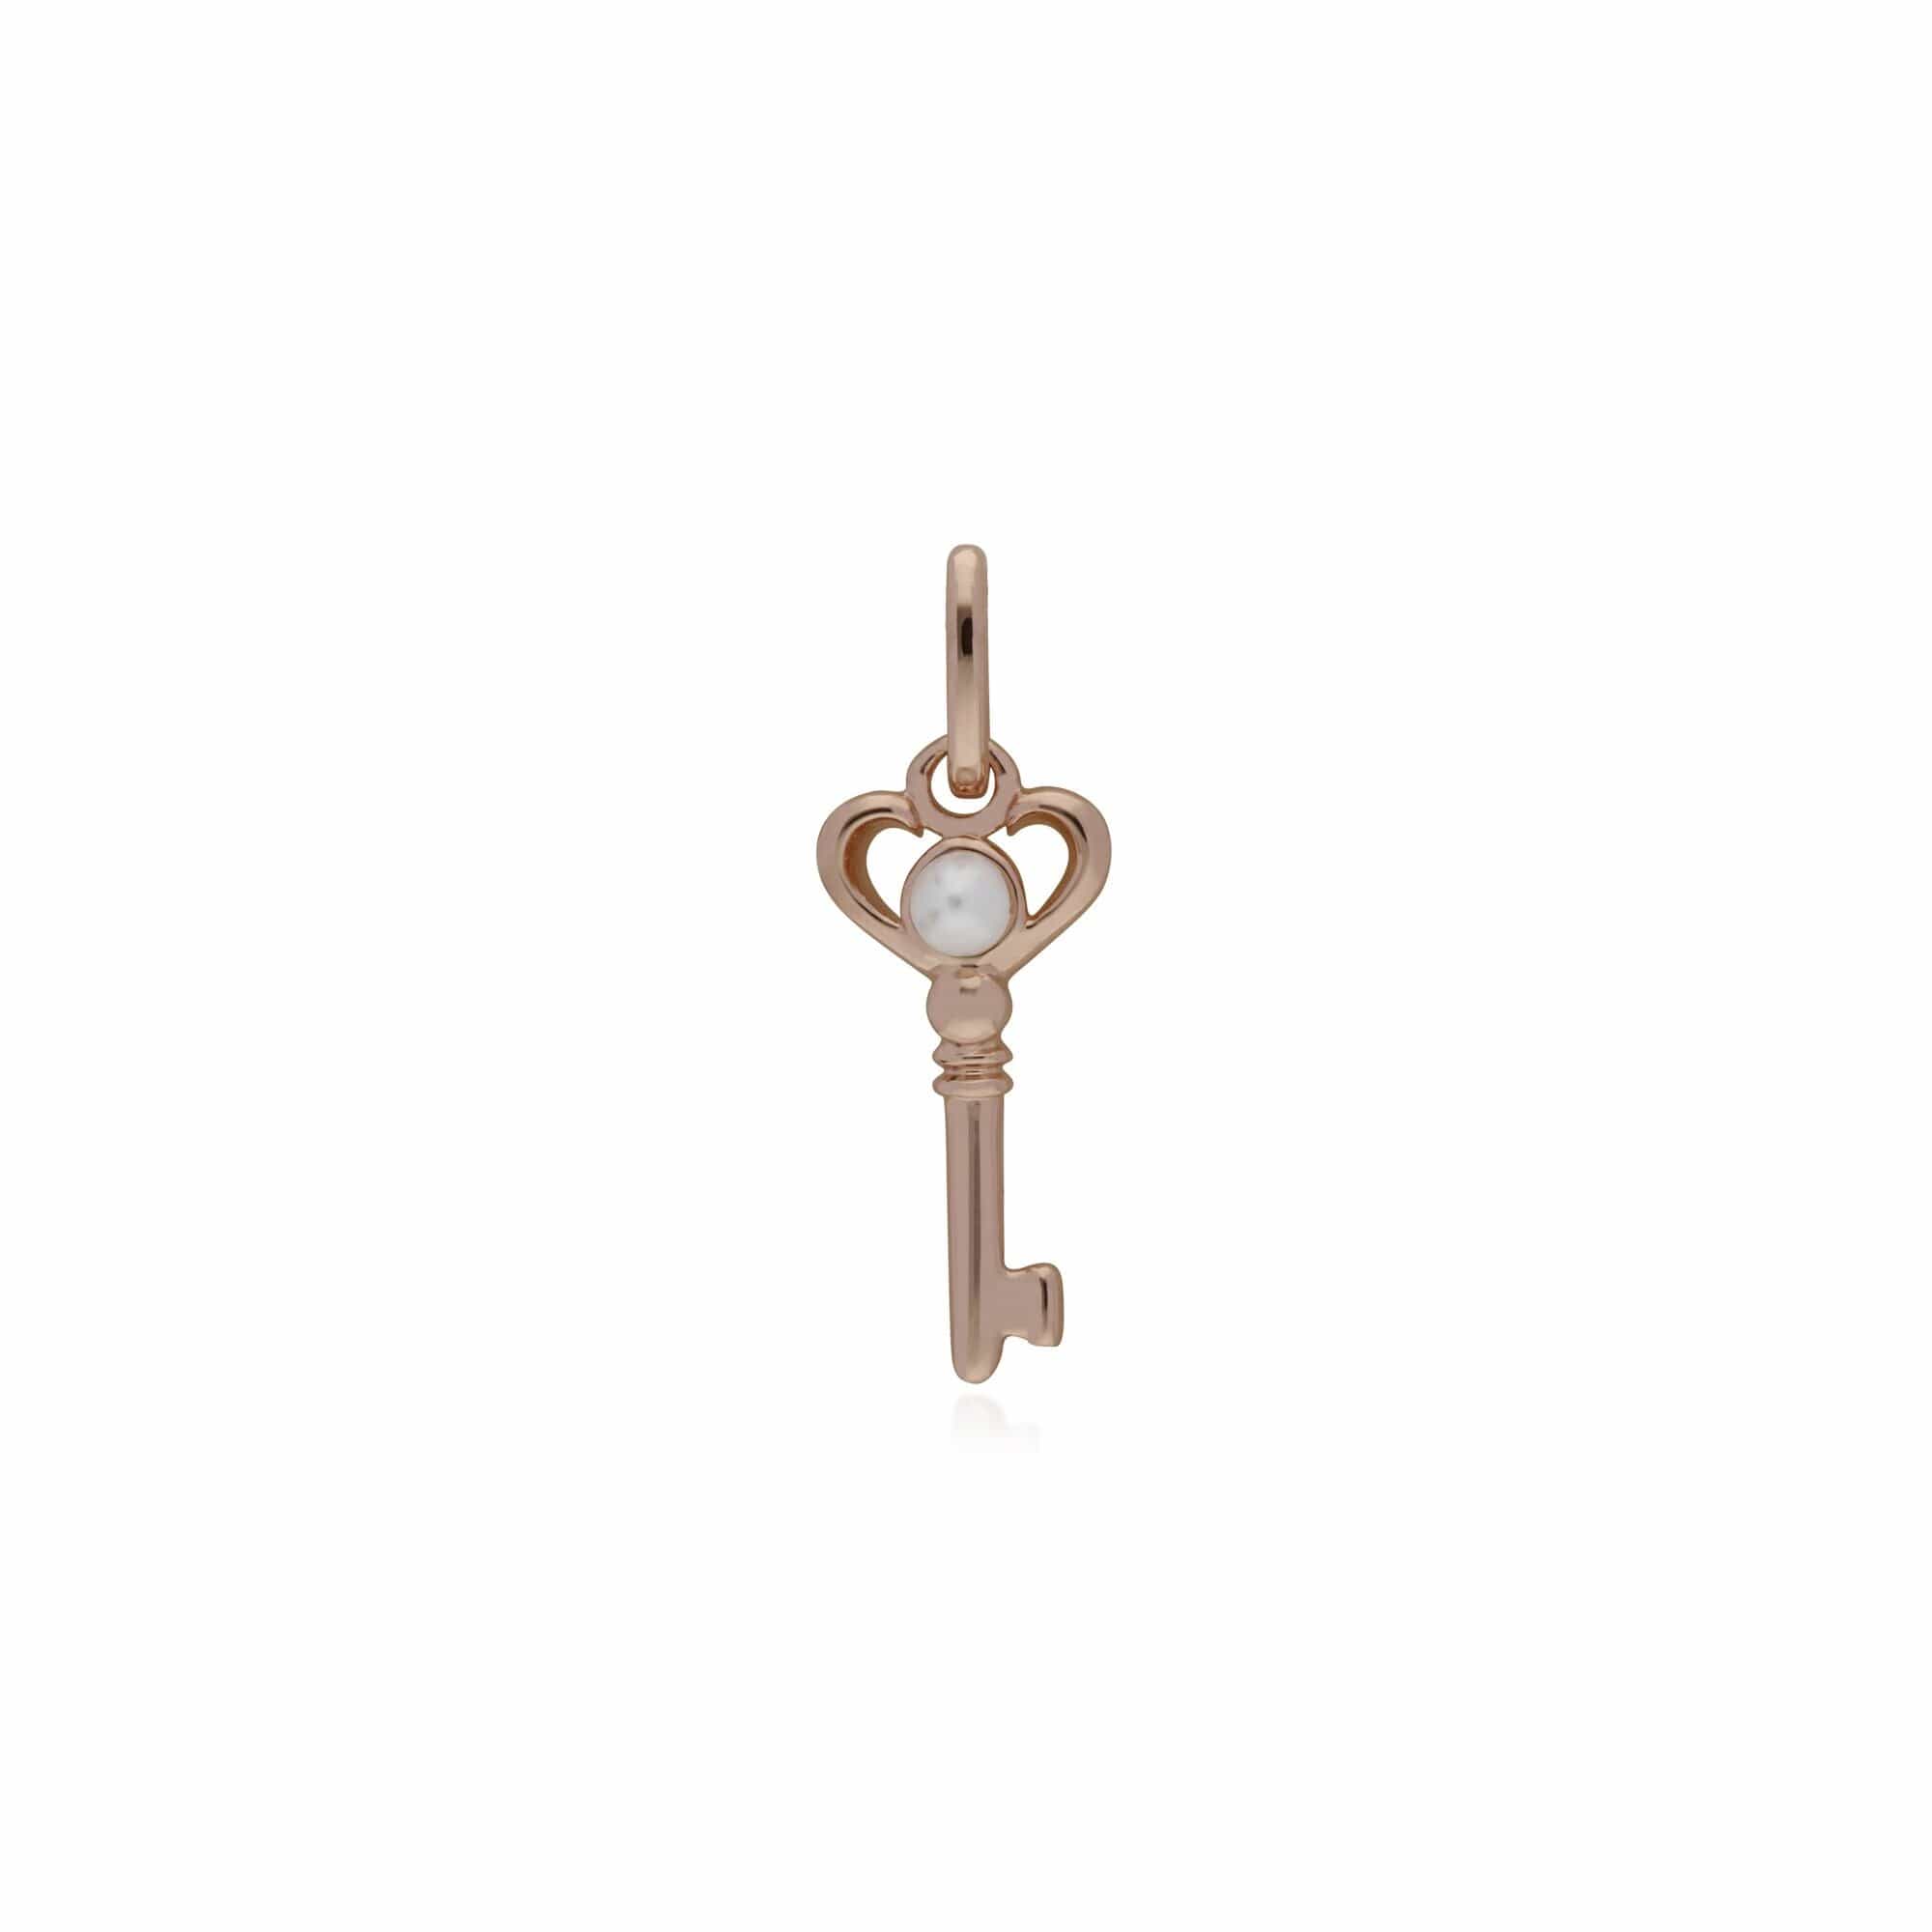 270P025701925-270P026501925 Classic Swirl Heart Lock Pendant & Pearl Charm in Rose Gold Plated 925 Sterling Silver 2